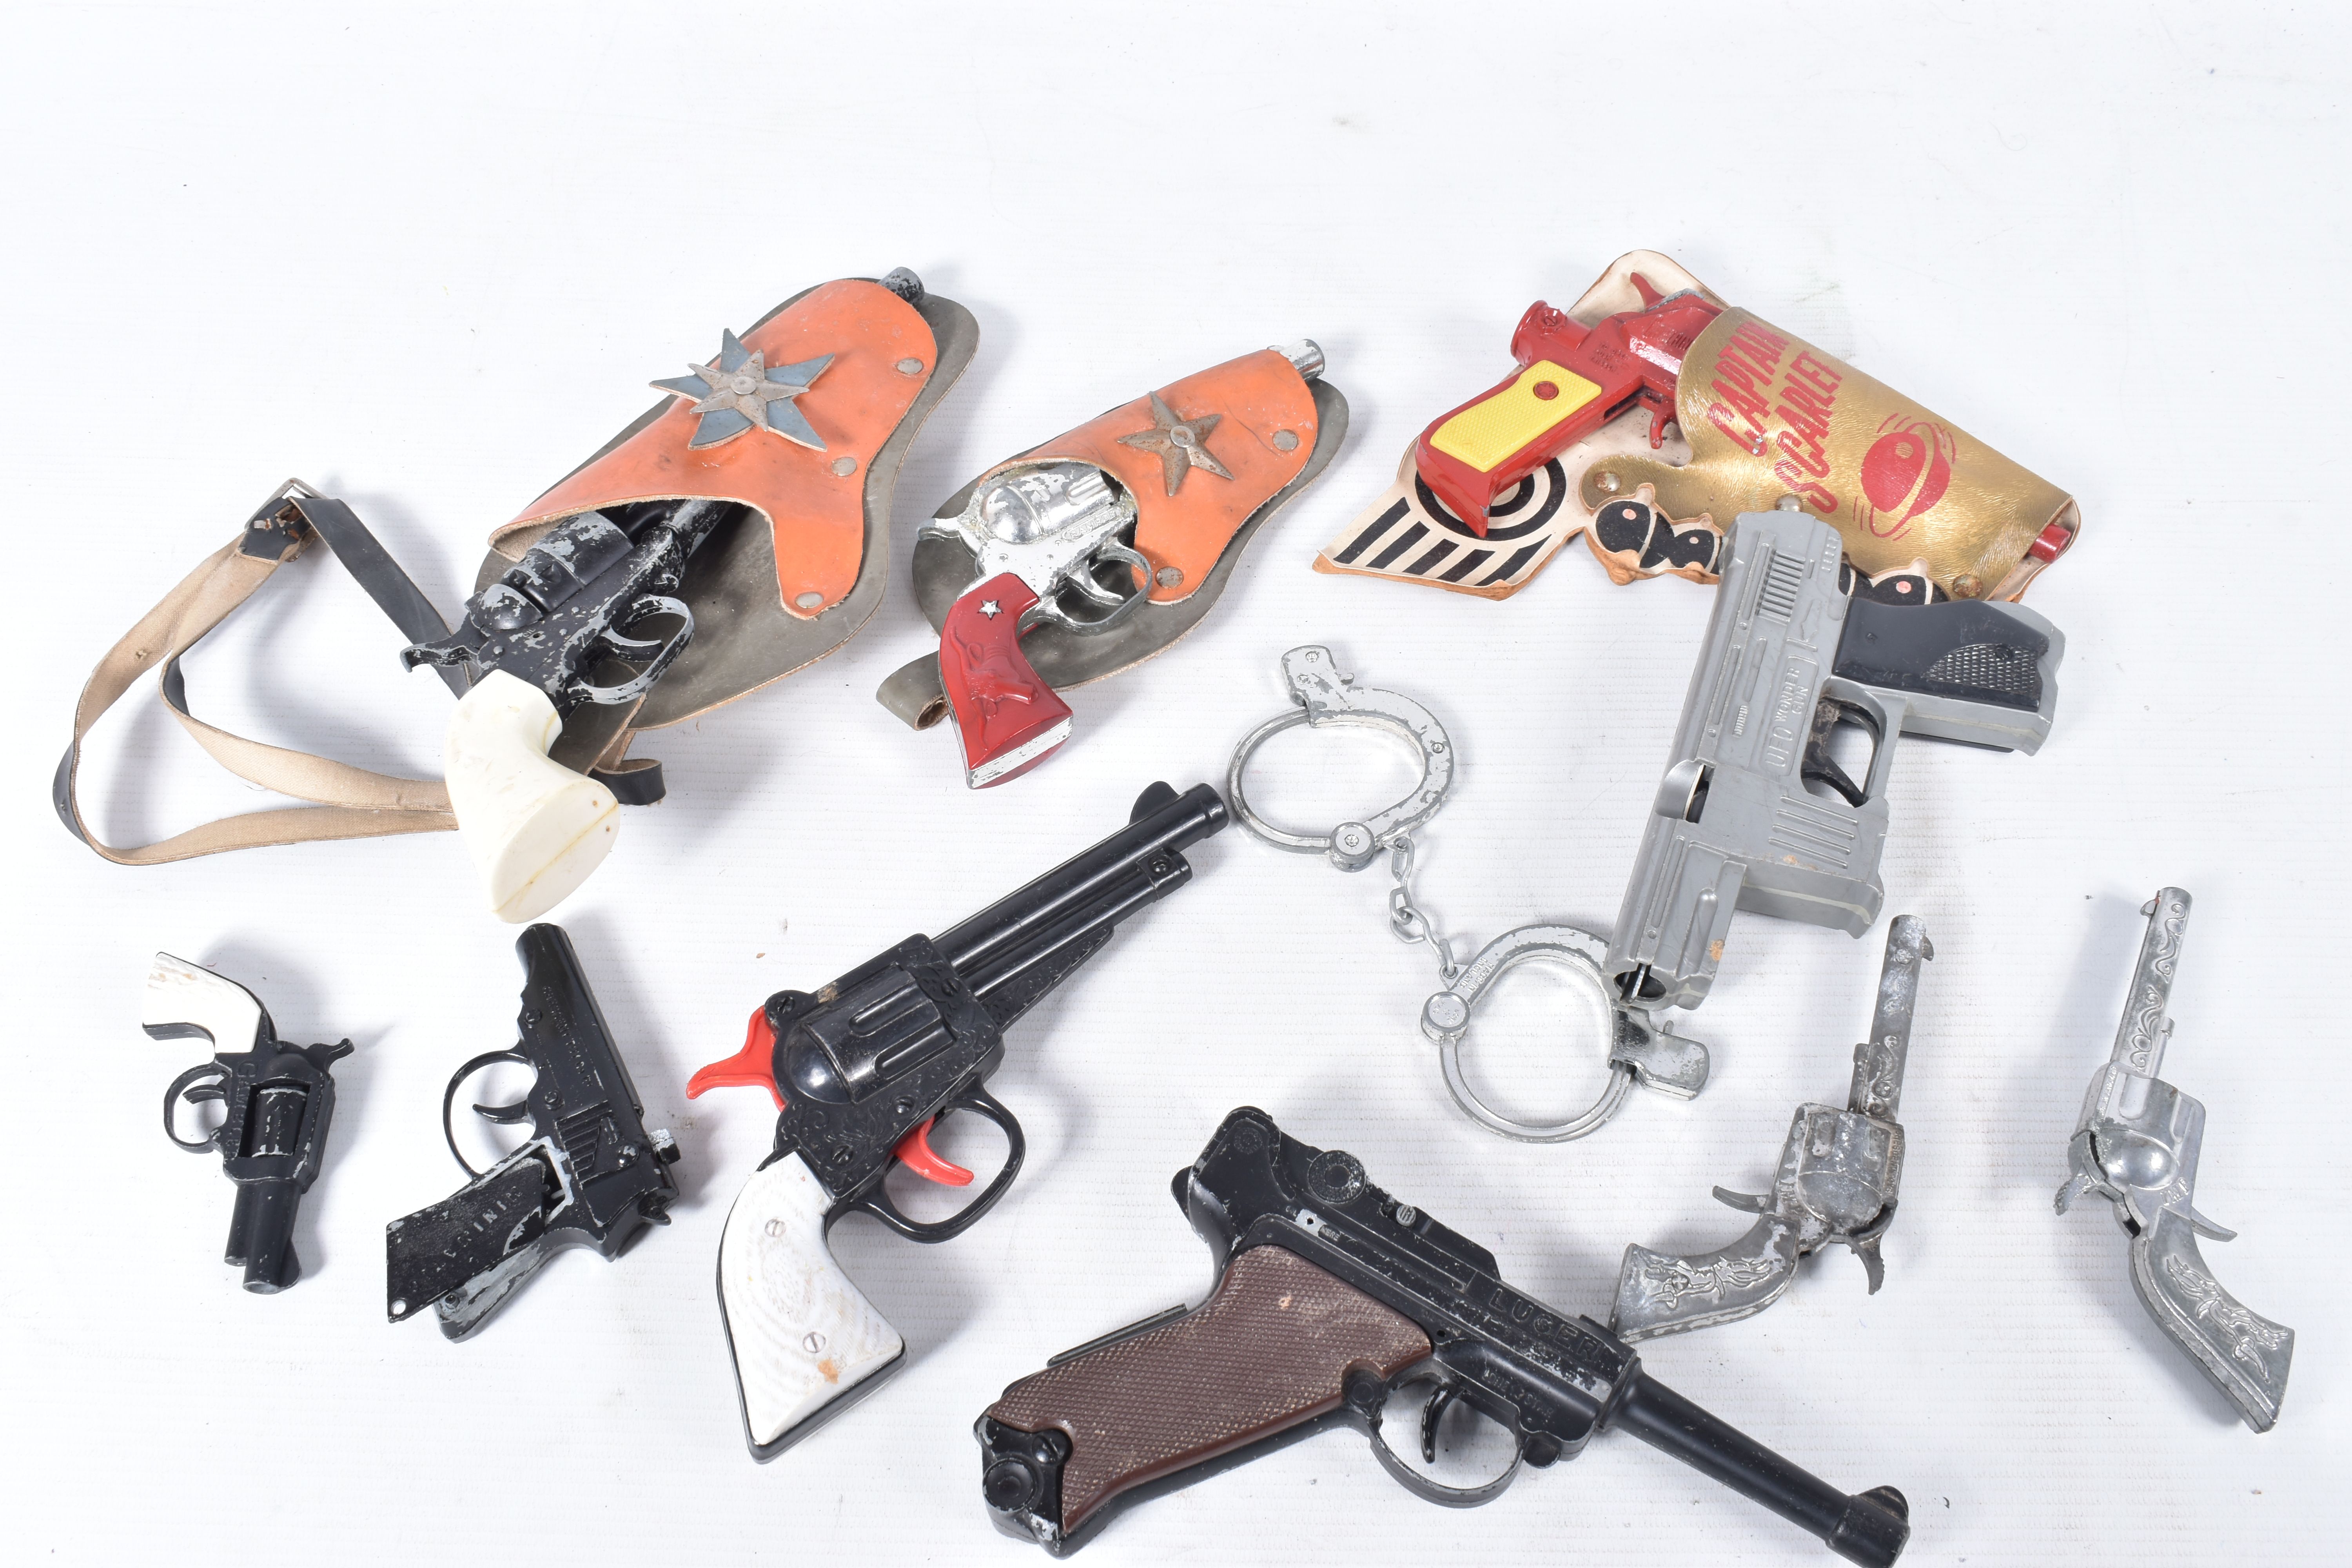 A DIECAST LONE STAR CAPTAIN SCARLET CAP GUN AND HOLSTER, with a collection of other diecast and